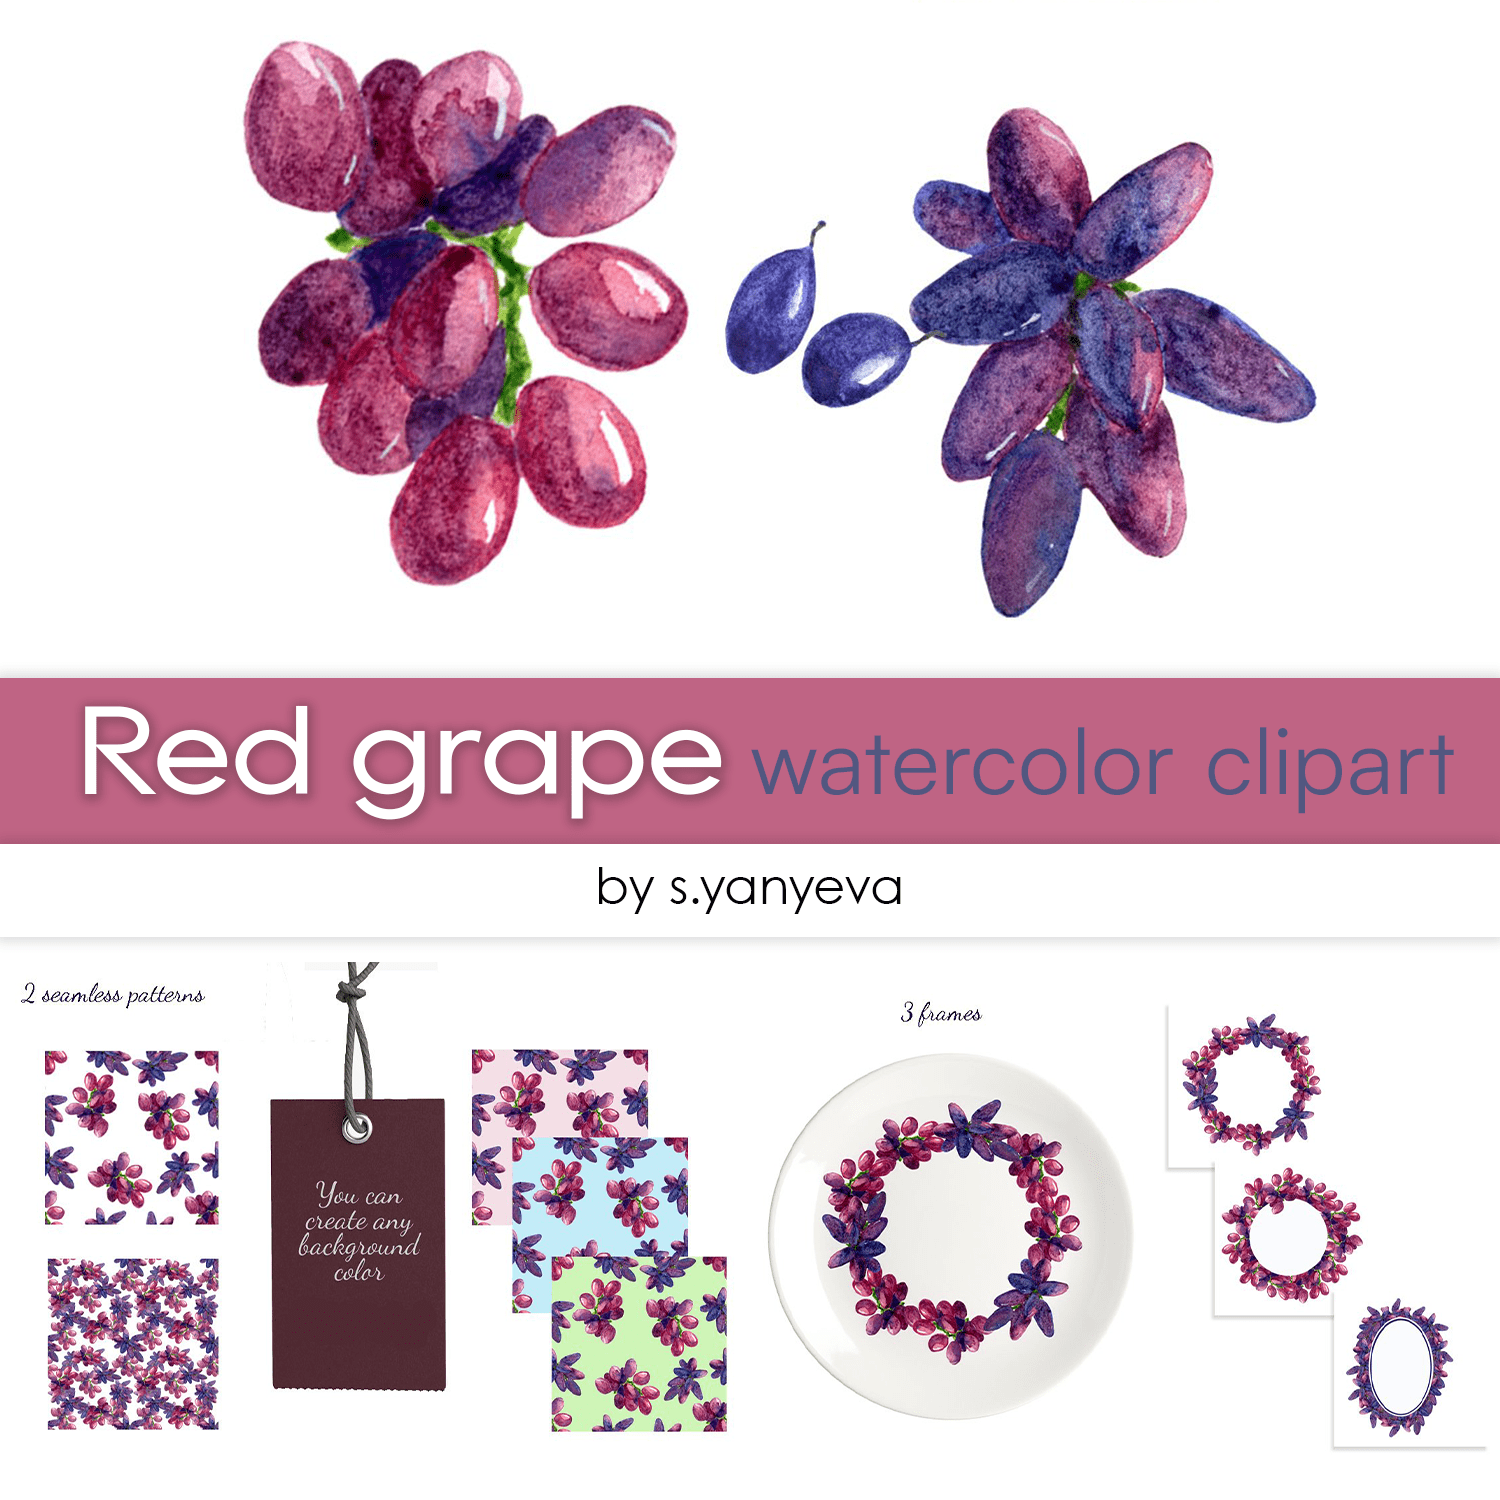 Red grape watercolor clipart created by s.yanyeva.